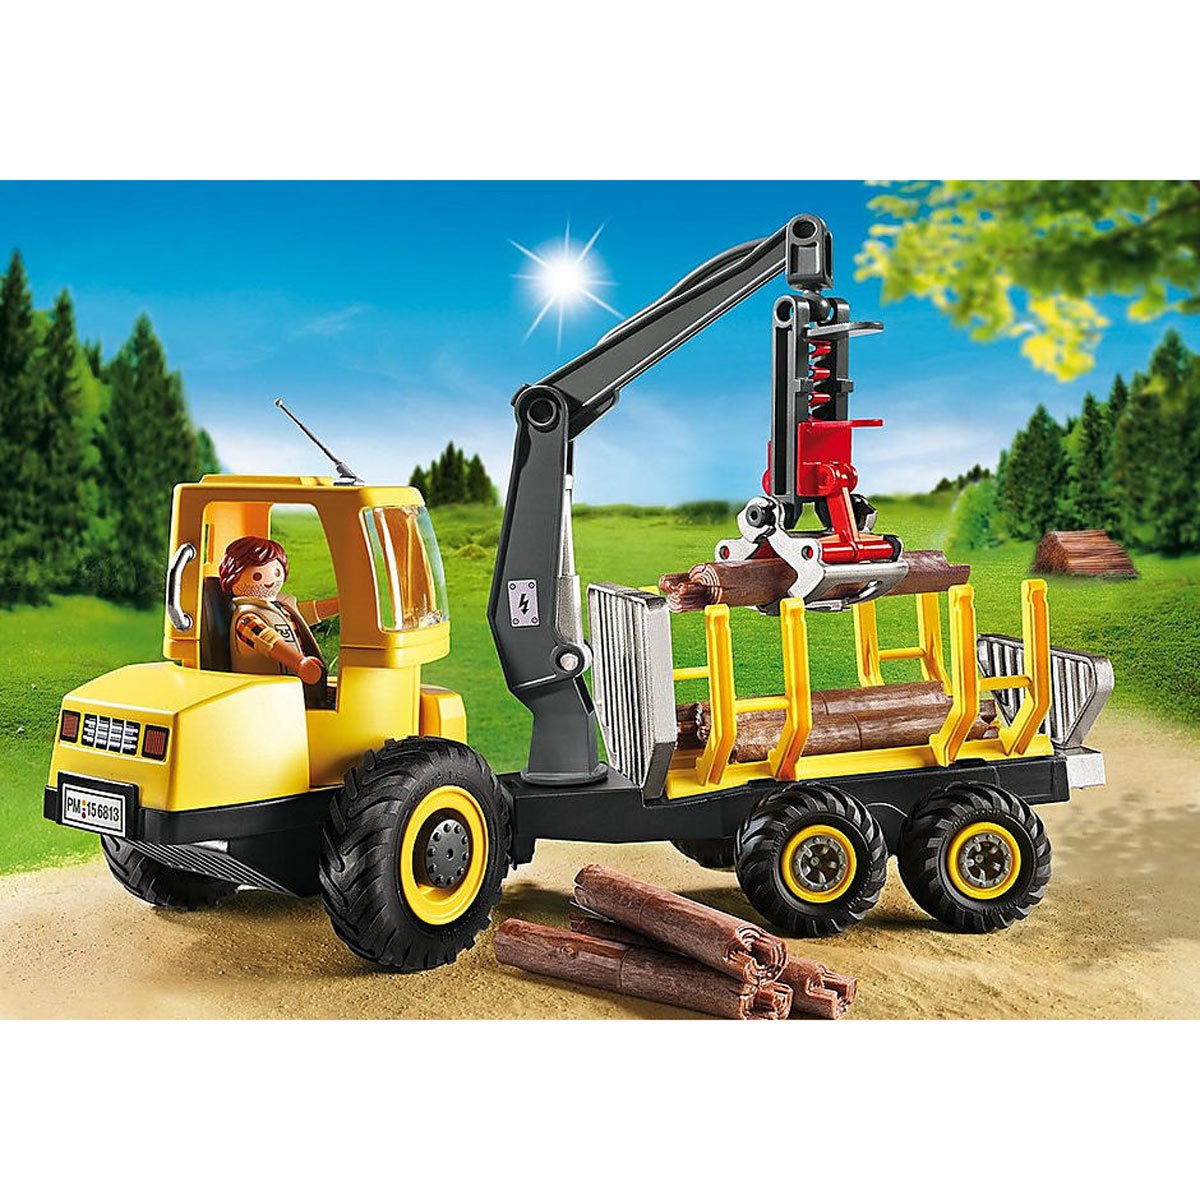 Playmobil Timber Truck With Crane Building Set 6538 NEW Learning Toys 